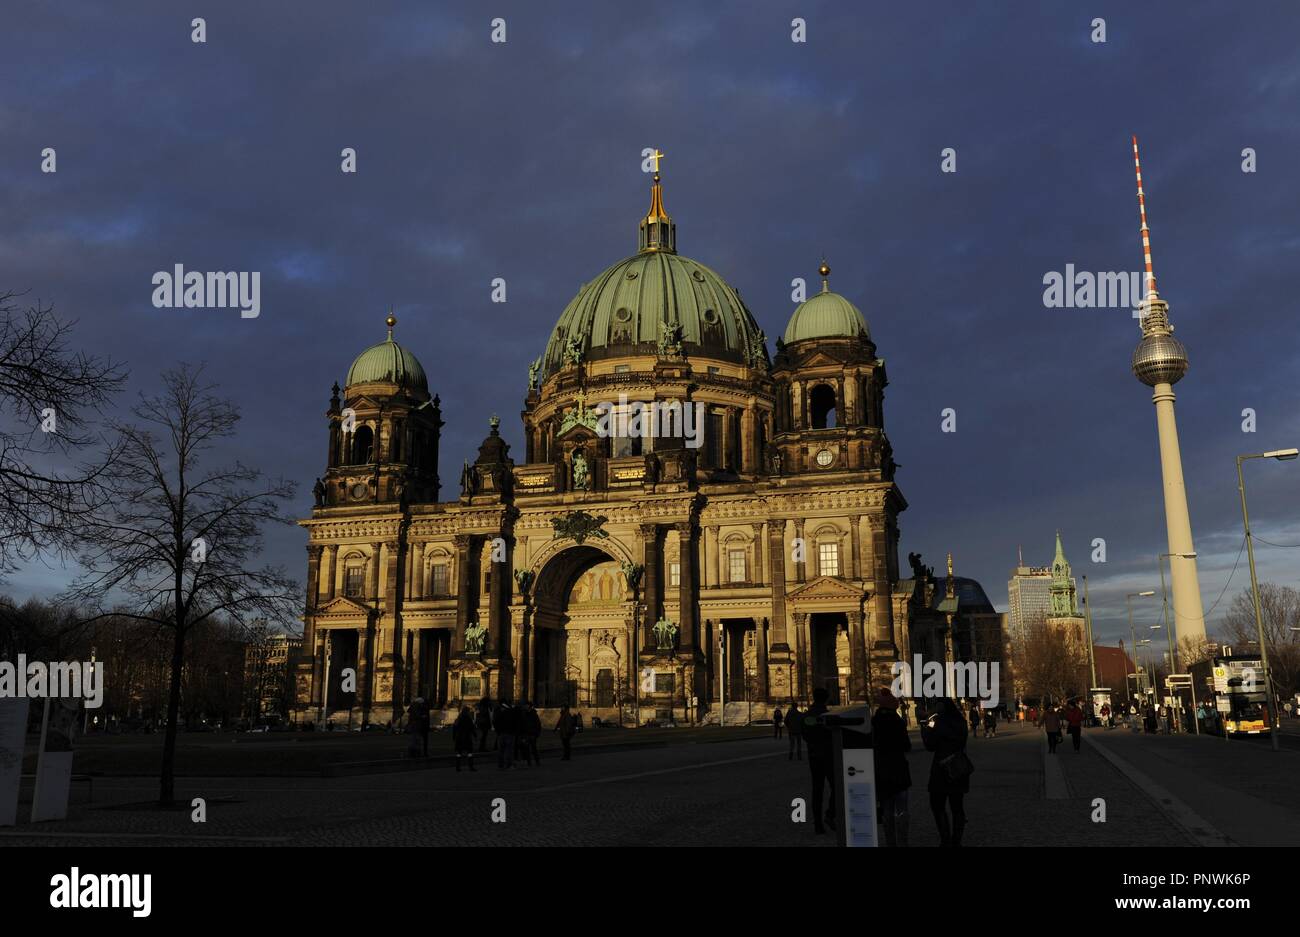 Germany. Berlin. Cathedral of Berlin: Berlin Dom. Evangelical church. It is a main work of Historicist architecture of the "Kaiserzeit", built between 1895-1905. General view. Stock Photo